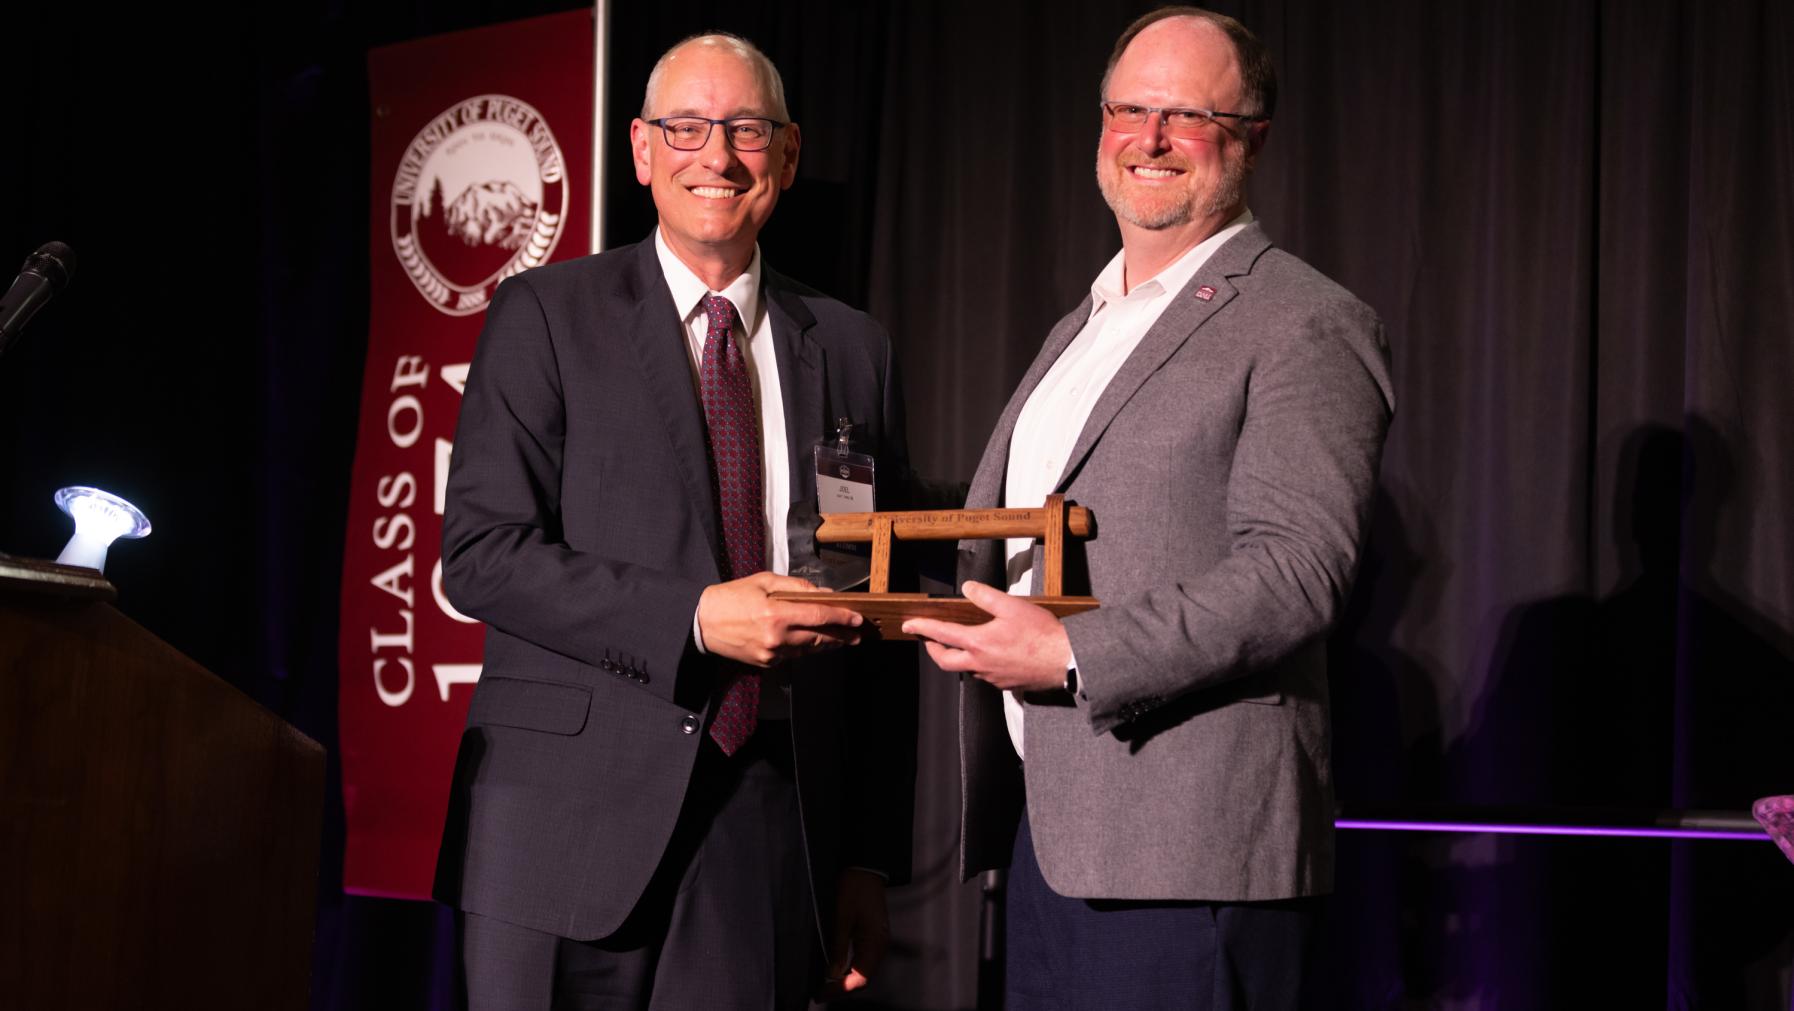 Outgoing Alumni Council Executive Committee President Ted Meriam '05 presents an the Distinguished Alumni Award for Service to Puget Sound to Joel Hefty '86.